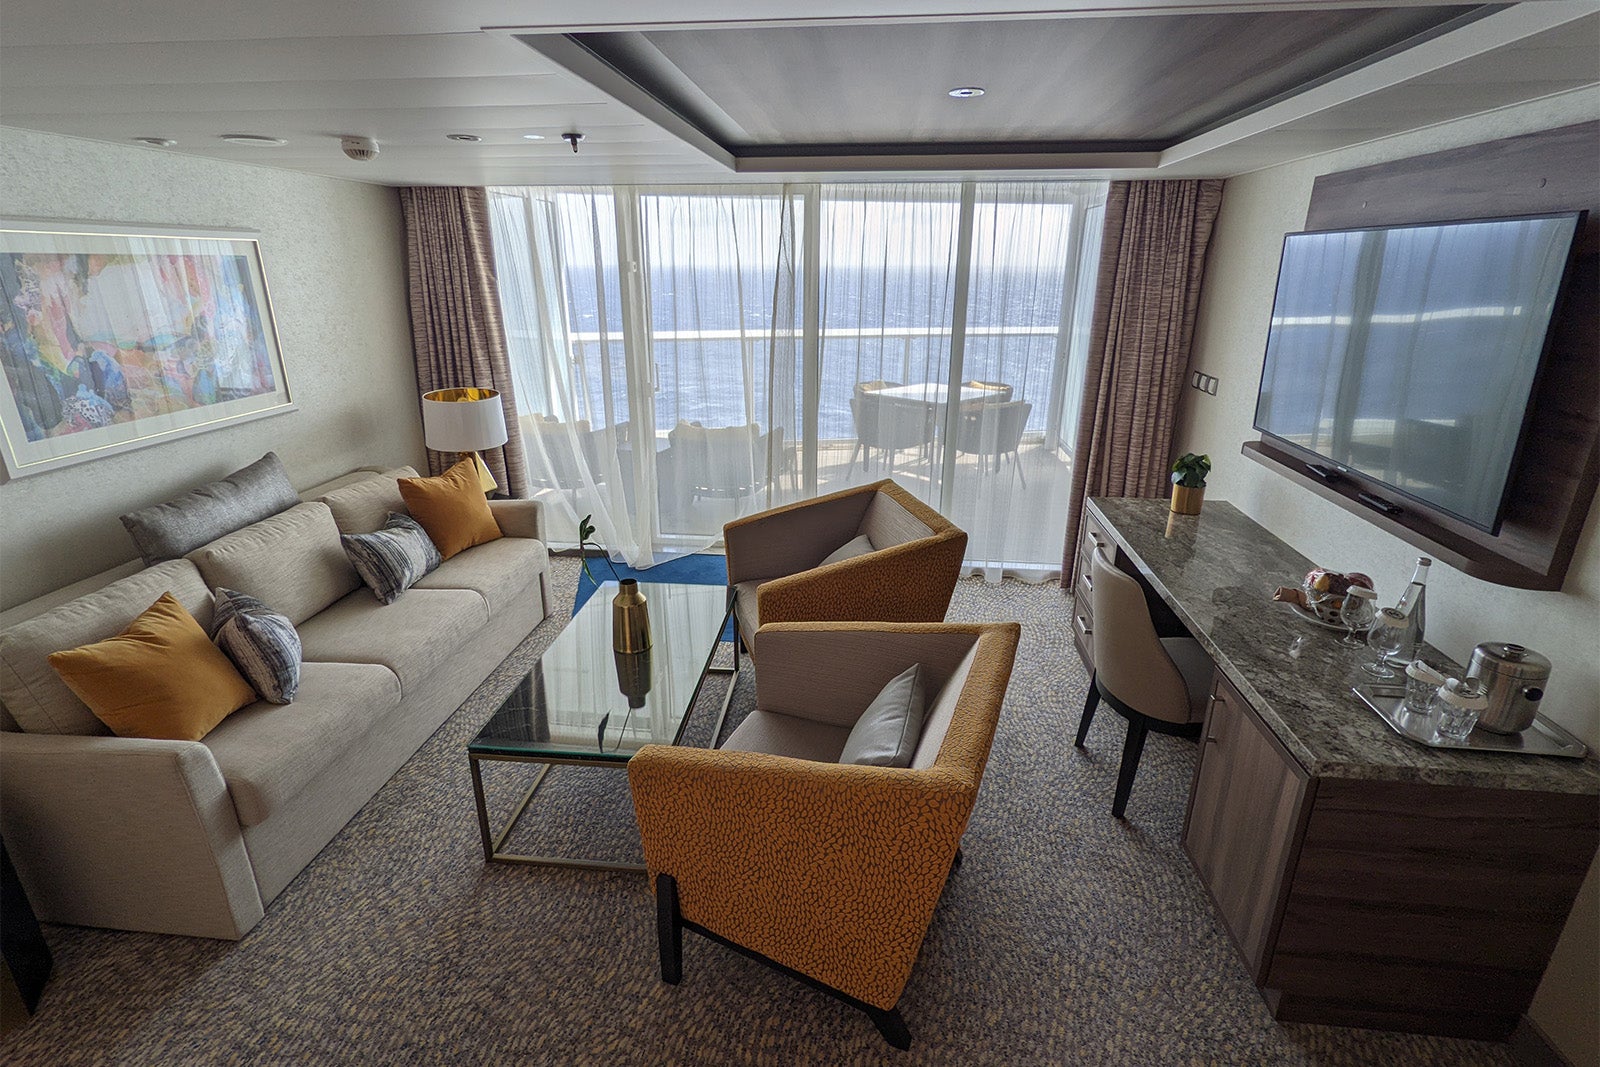 Living room and balcony of cruise ship suite